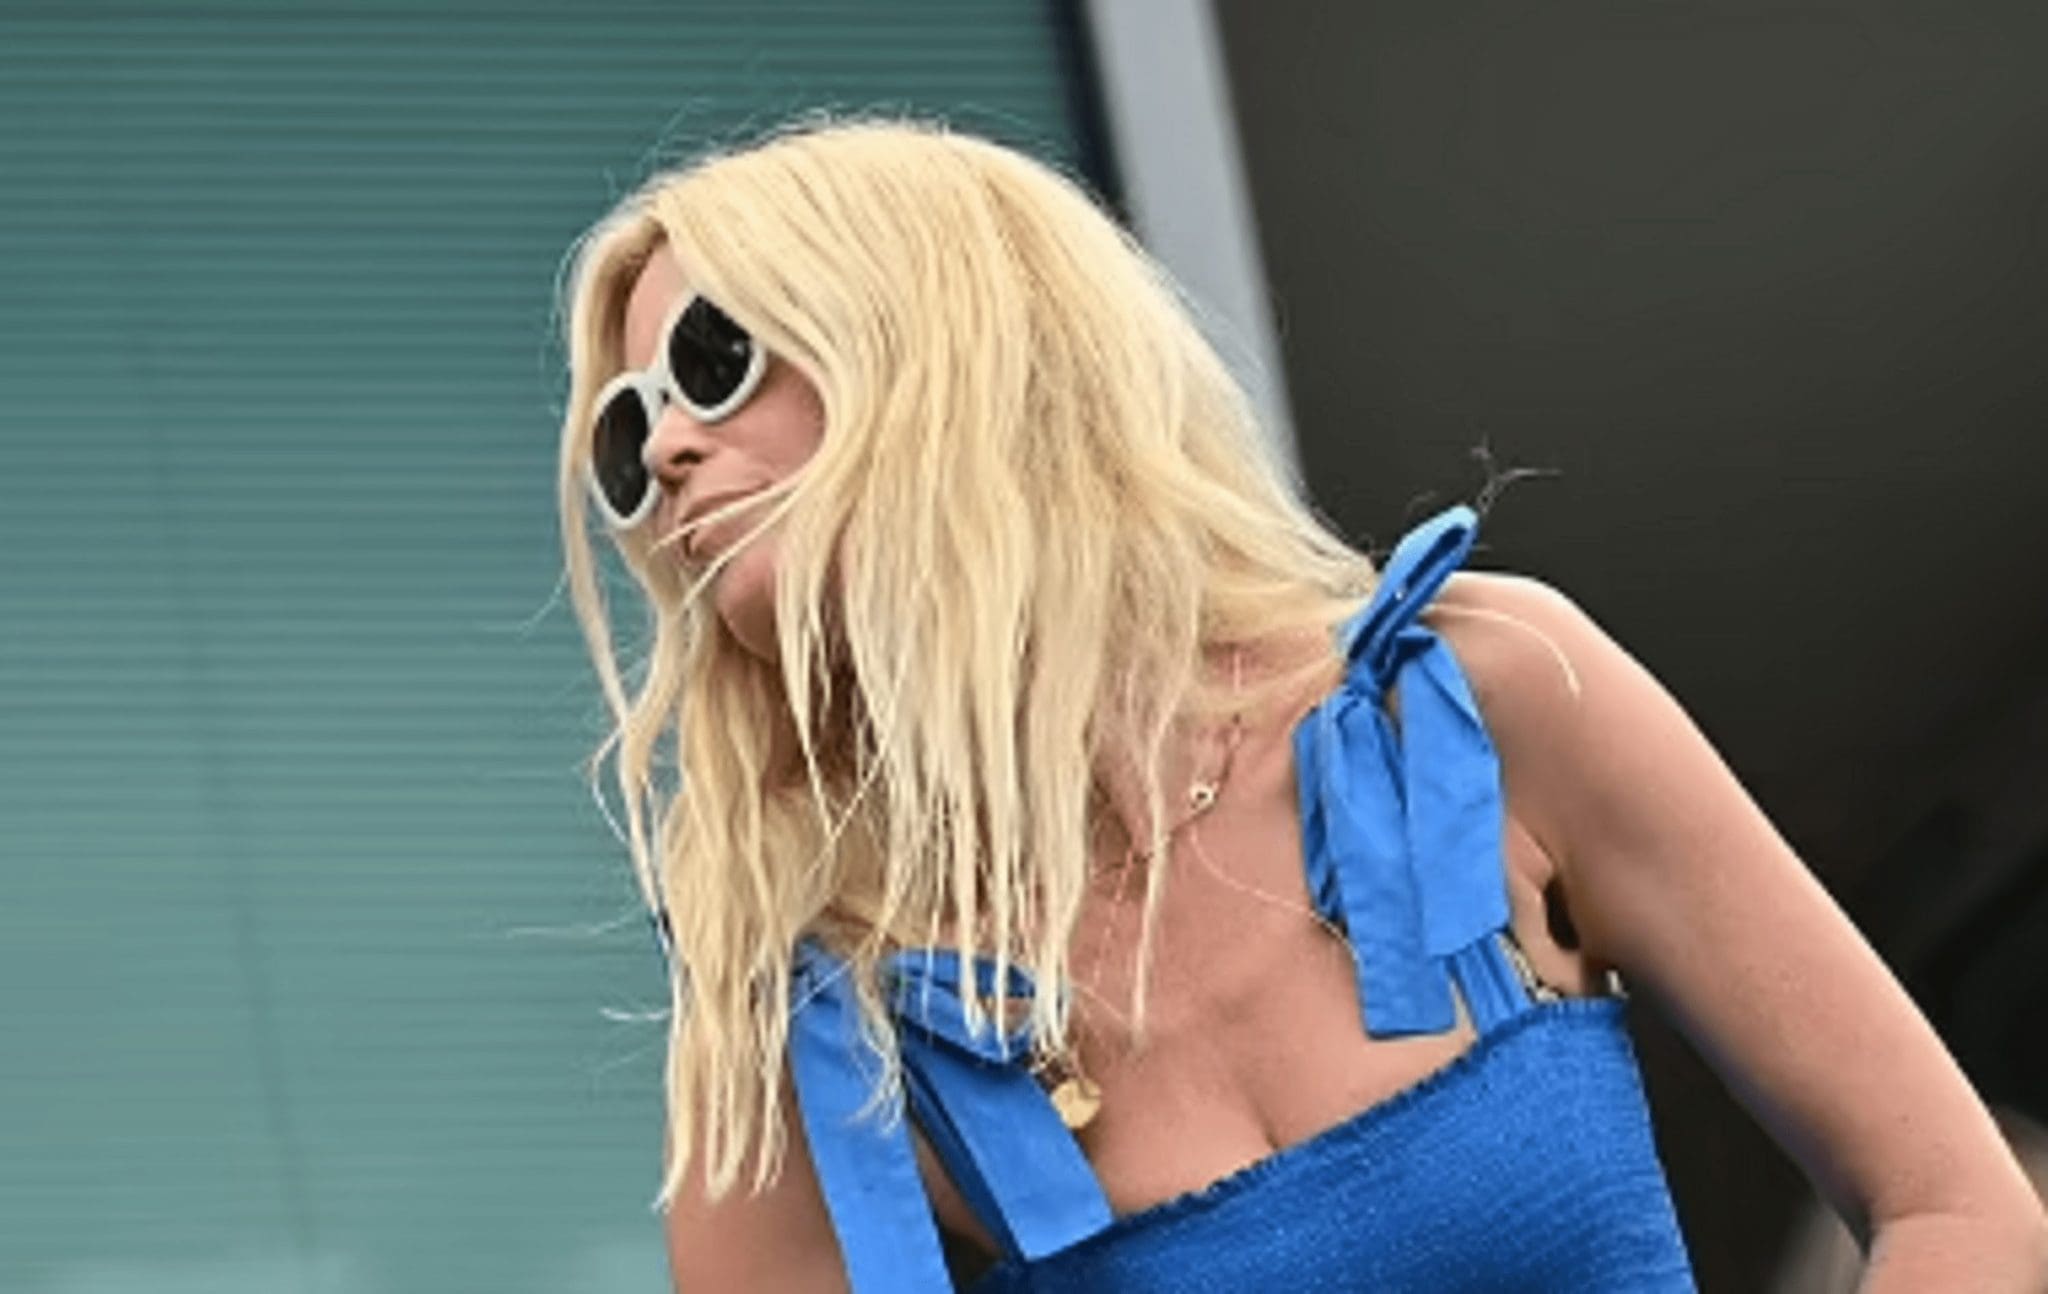 On Sunday, Claudia Schiffer Escaped Her Hectic Schedule